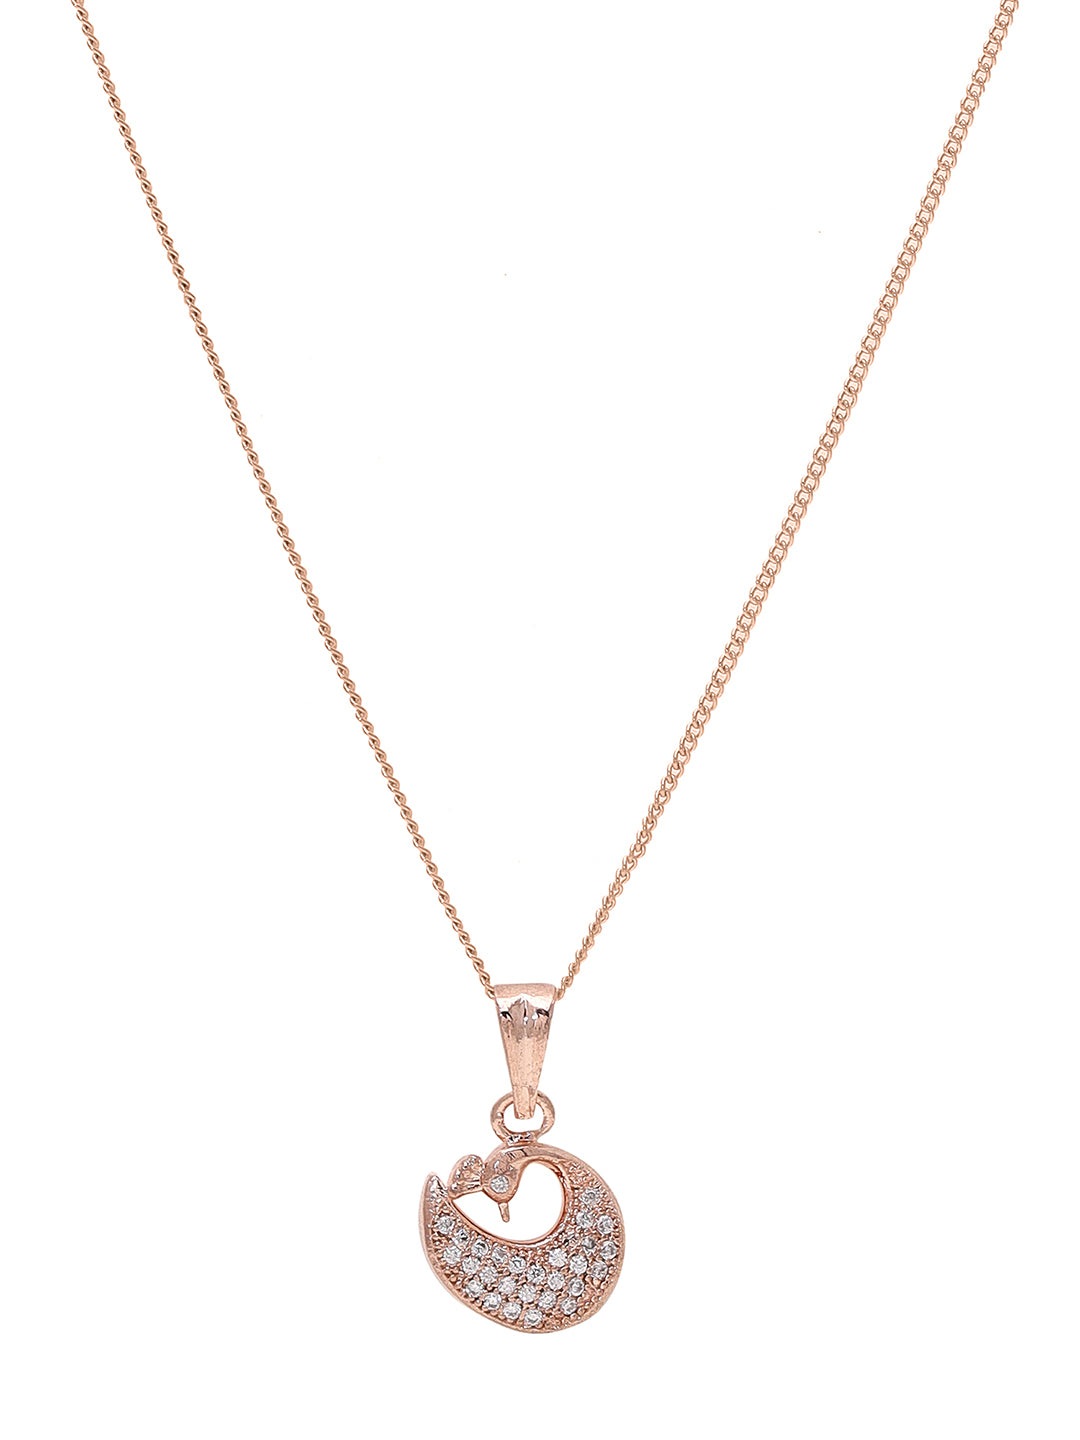 Priyaasi Radiant Rose Gold Plated American Diamond Necklace